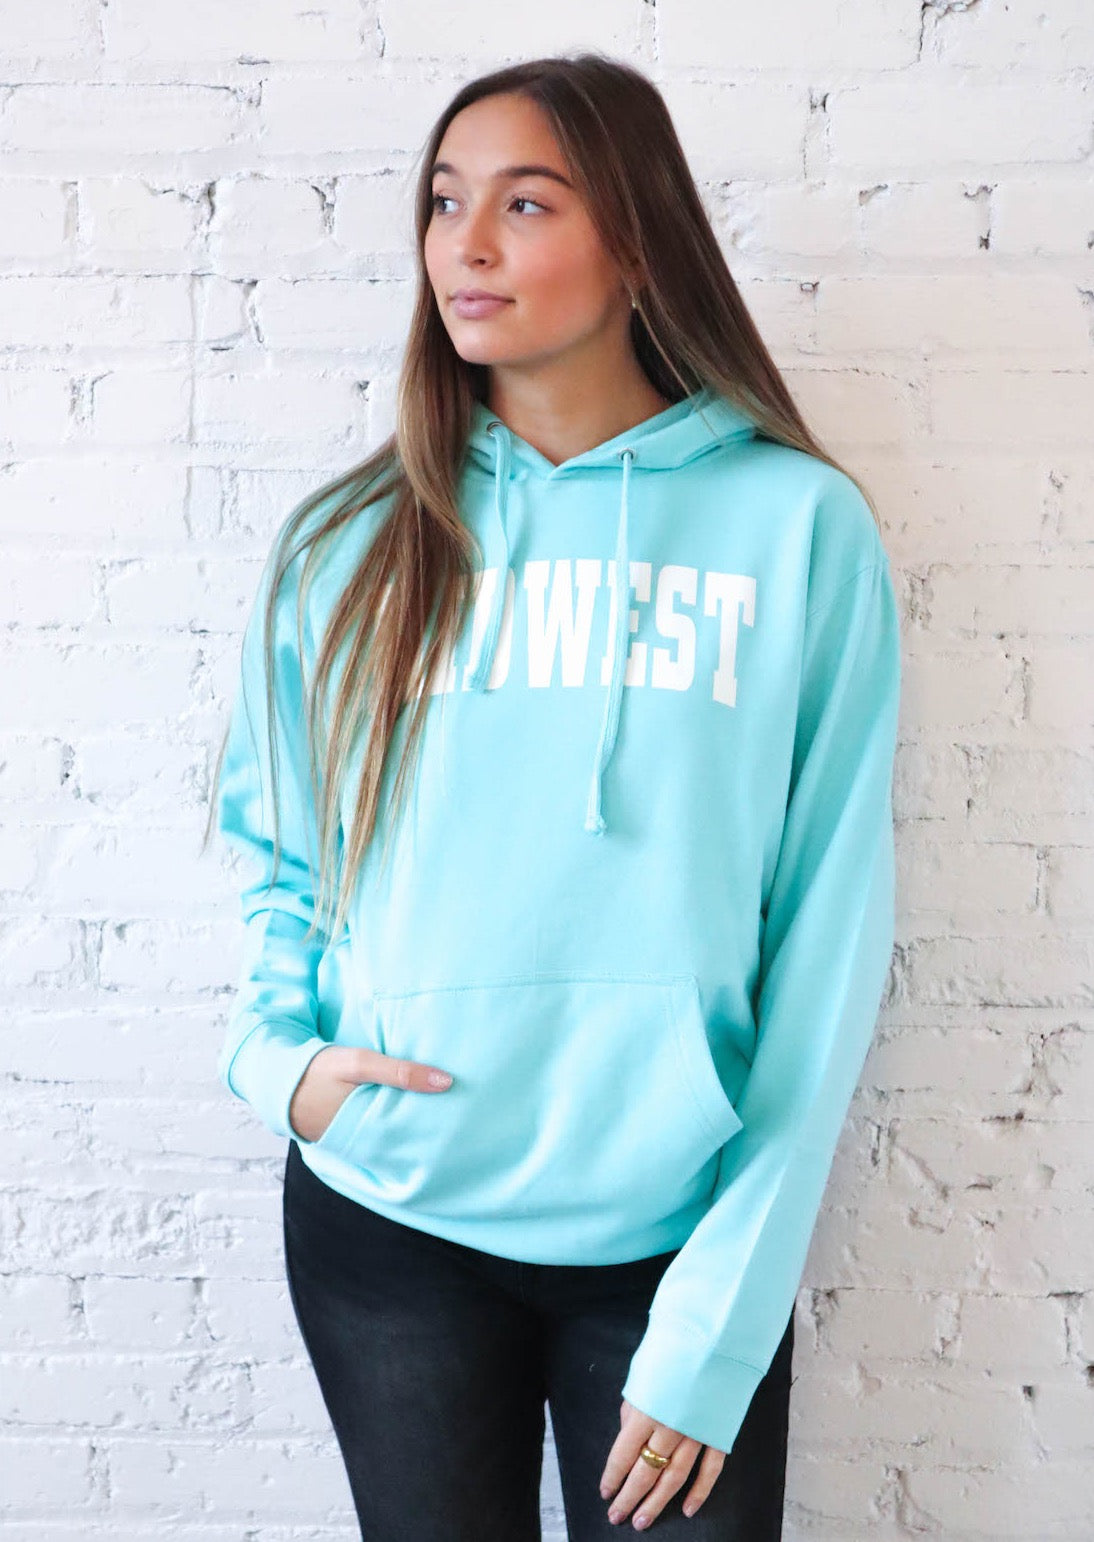 Midwest Hoodie - Turquoise